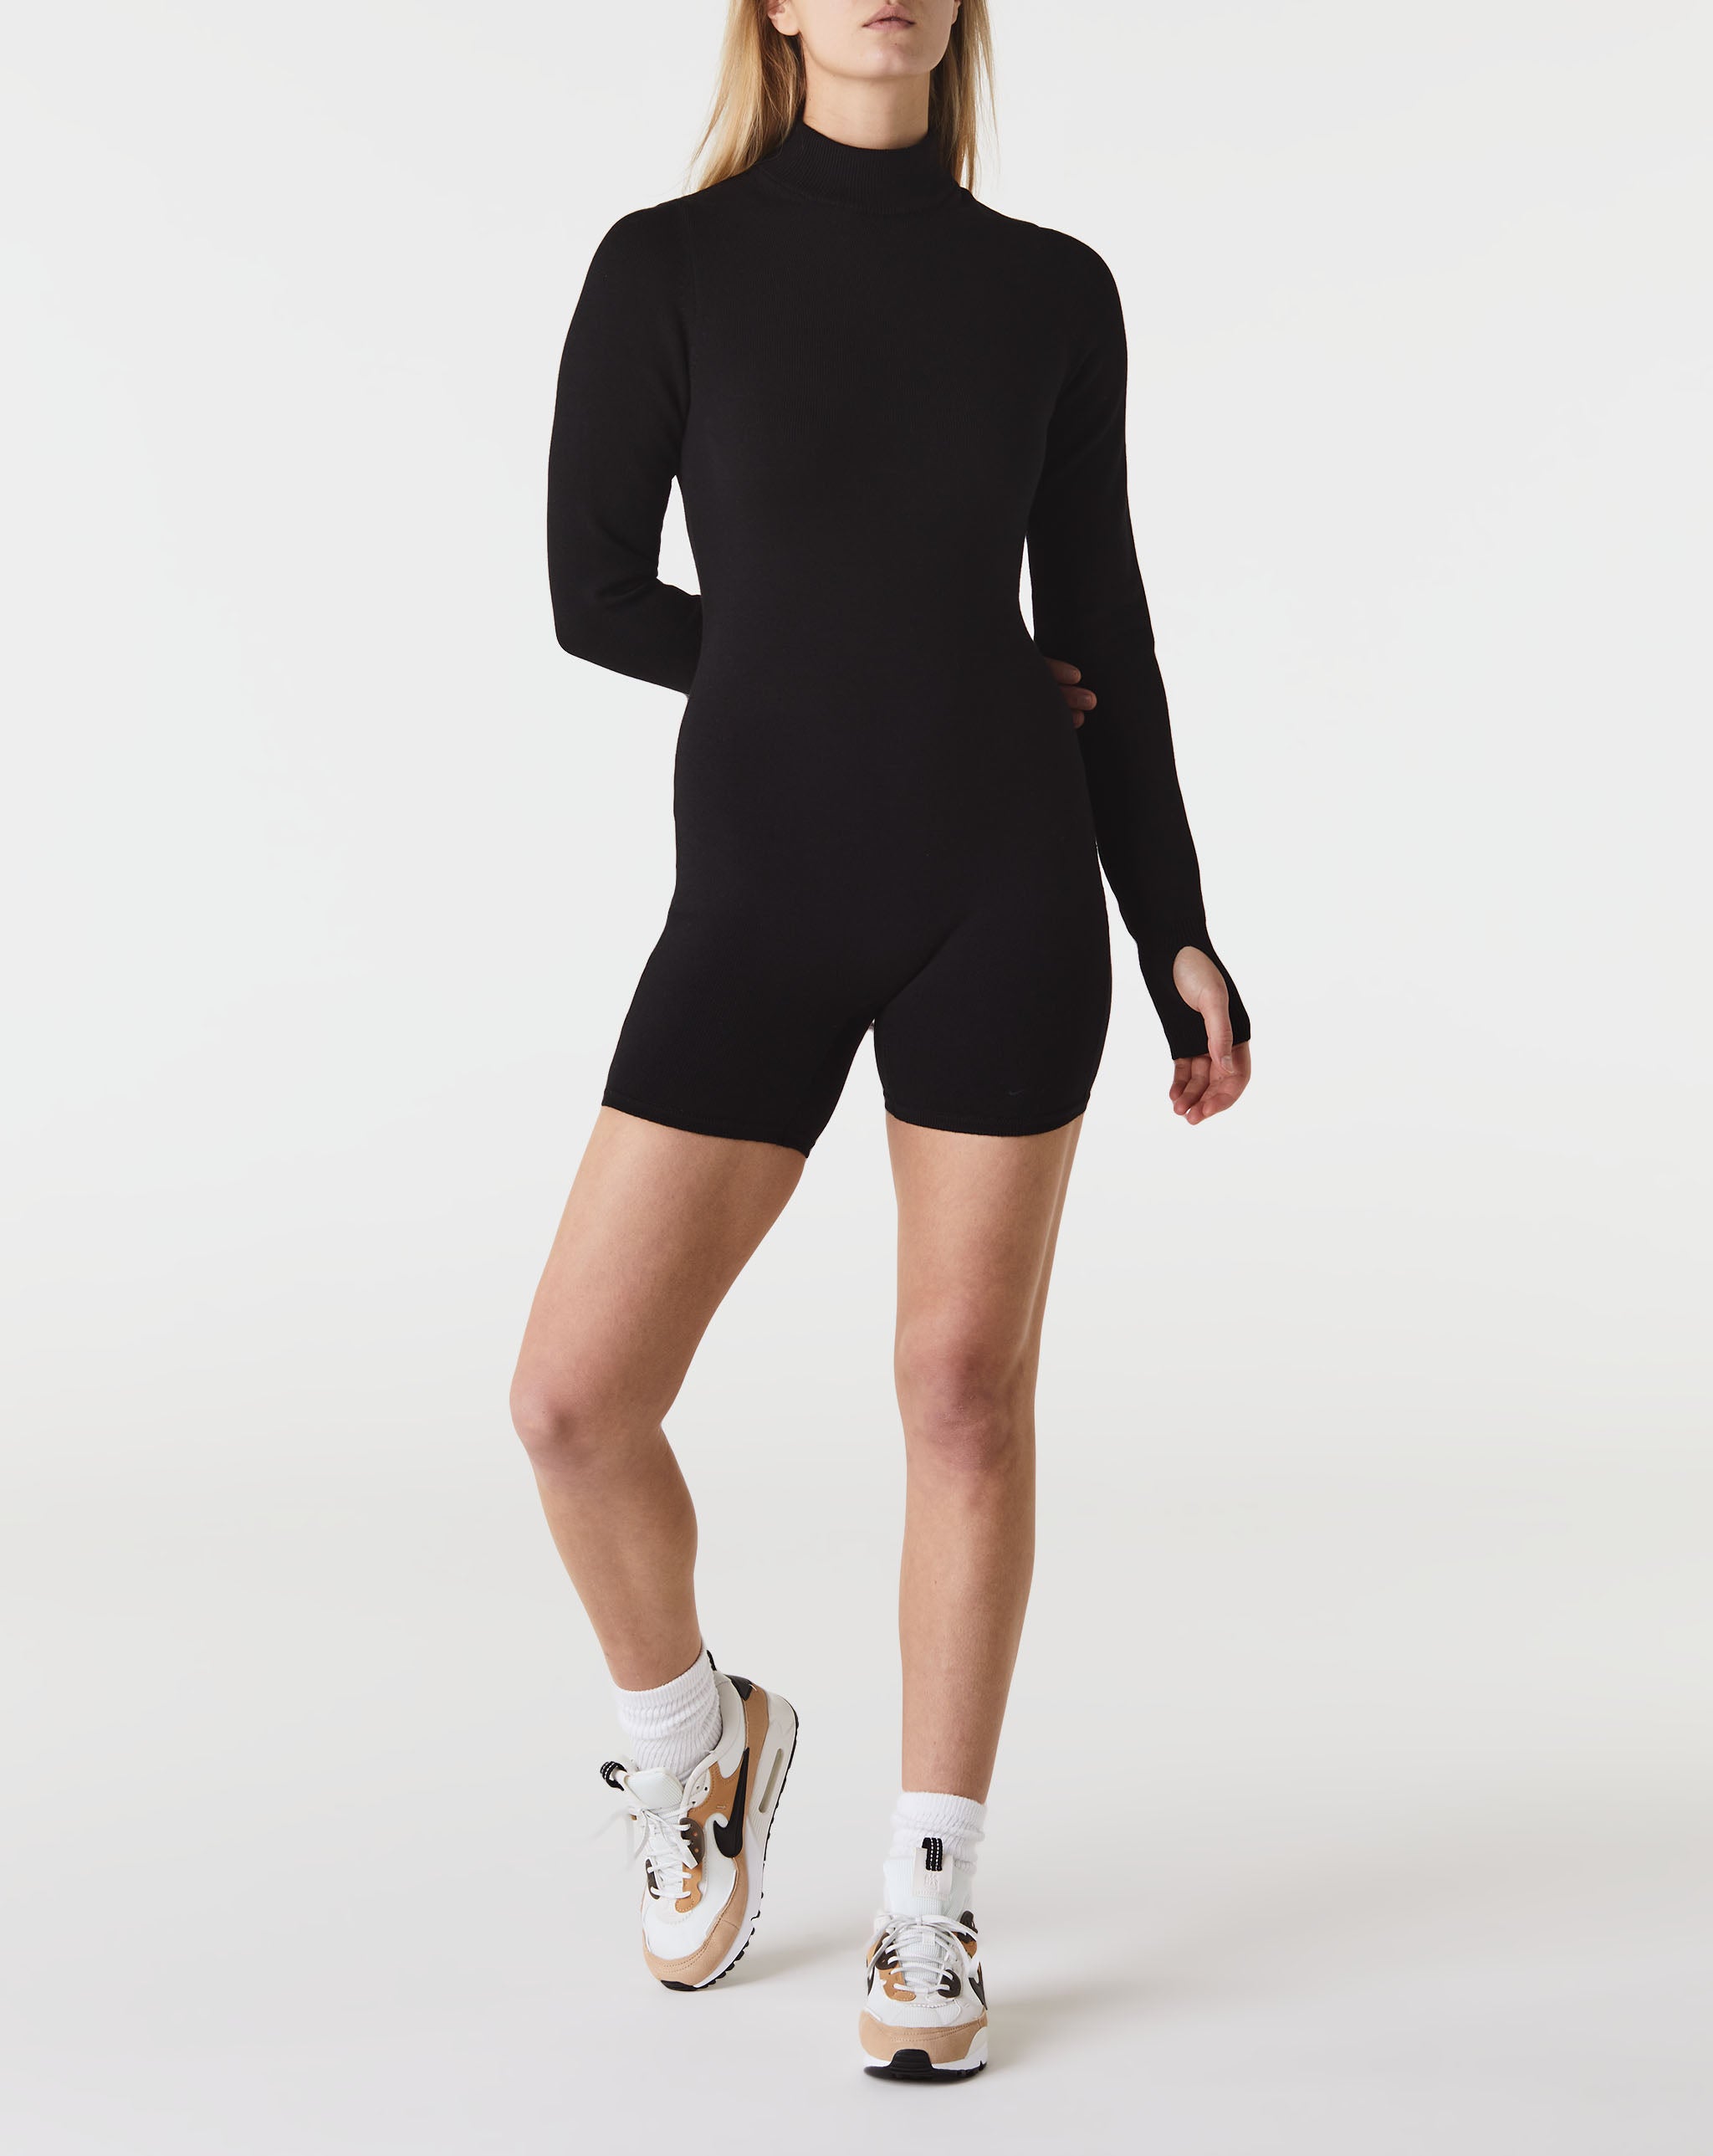 Nike Women's Every Stitch Considered Bodysuit - Rule of Next Apparel